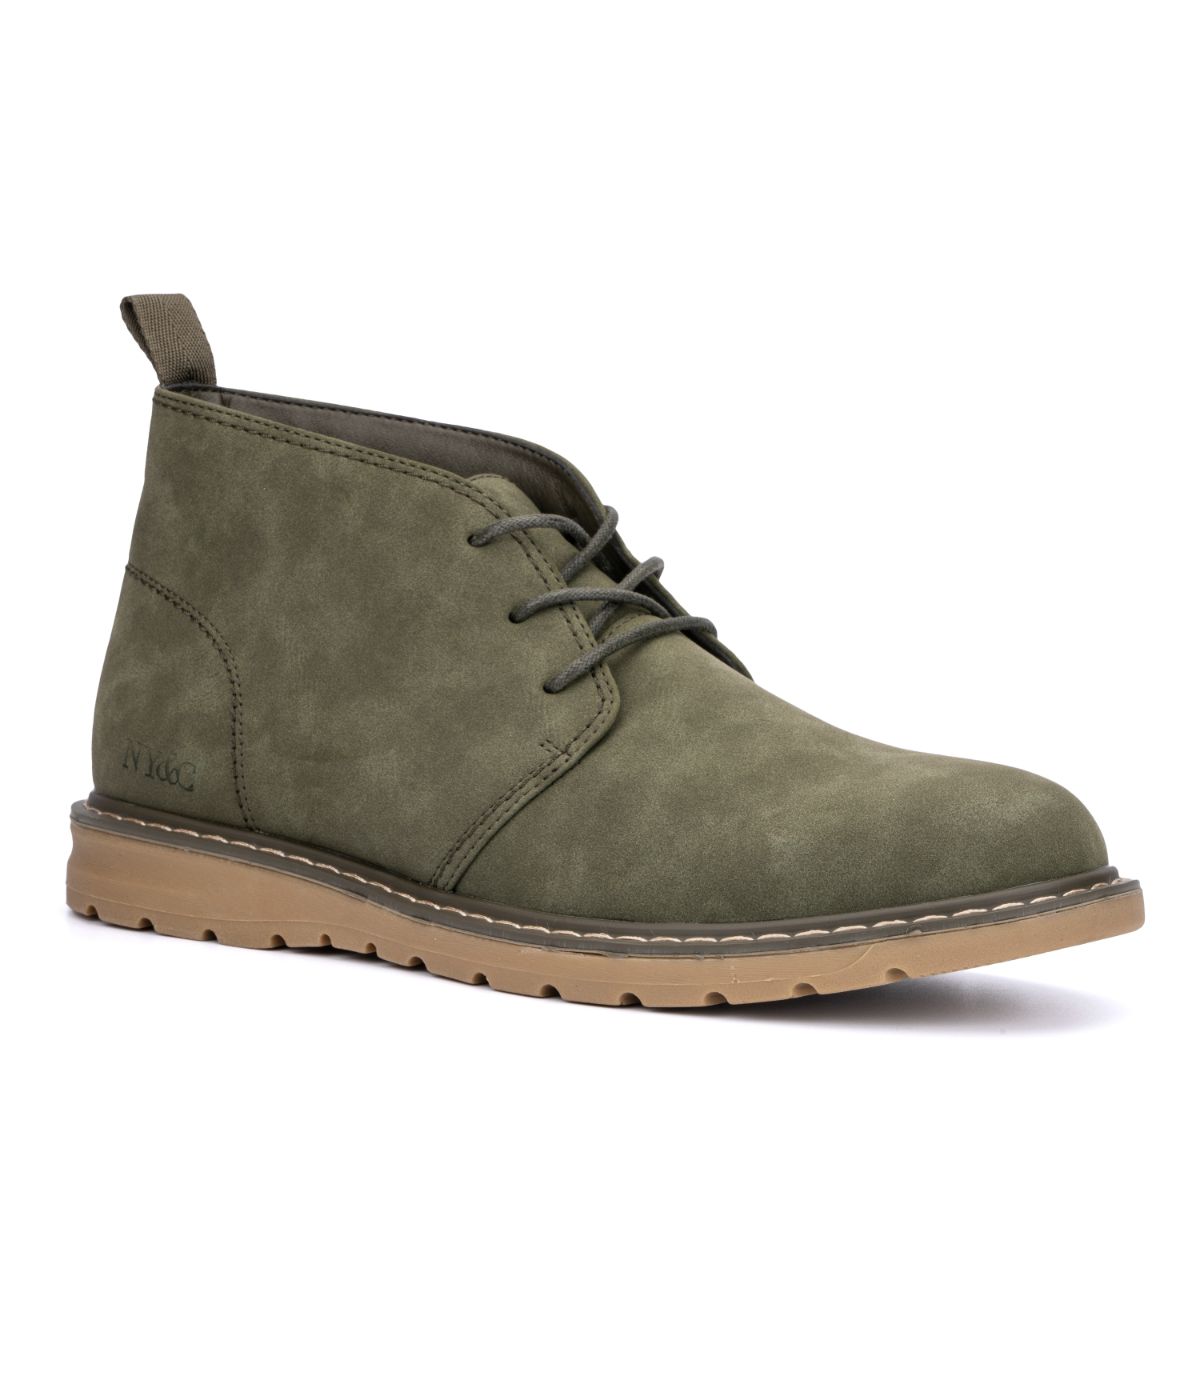 New York and Company Men's Dooley Boot Olive